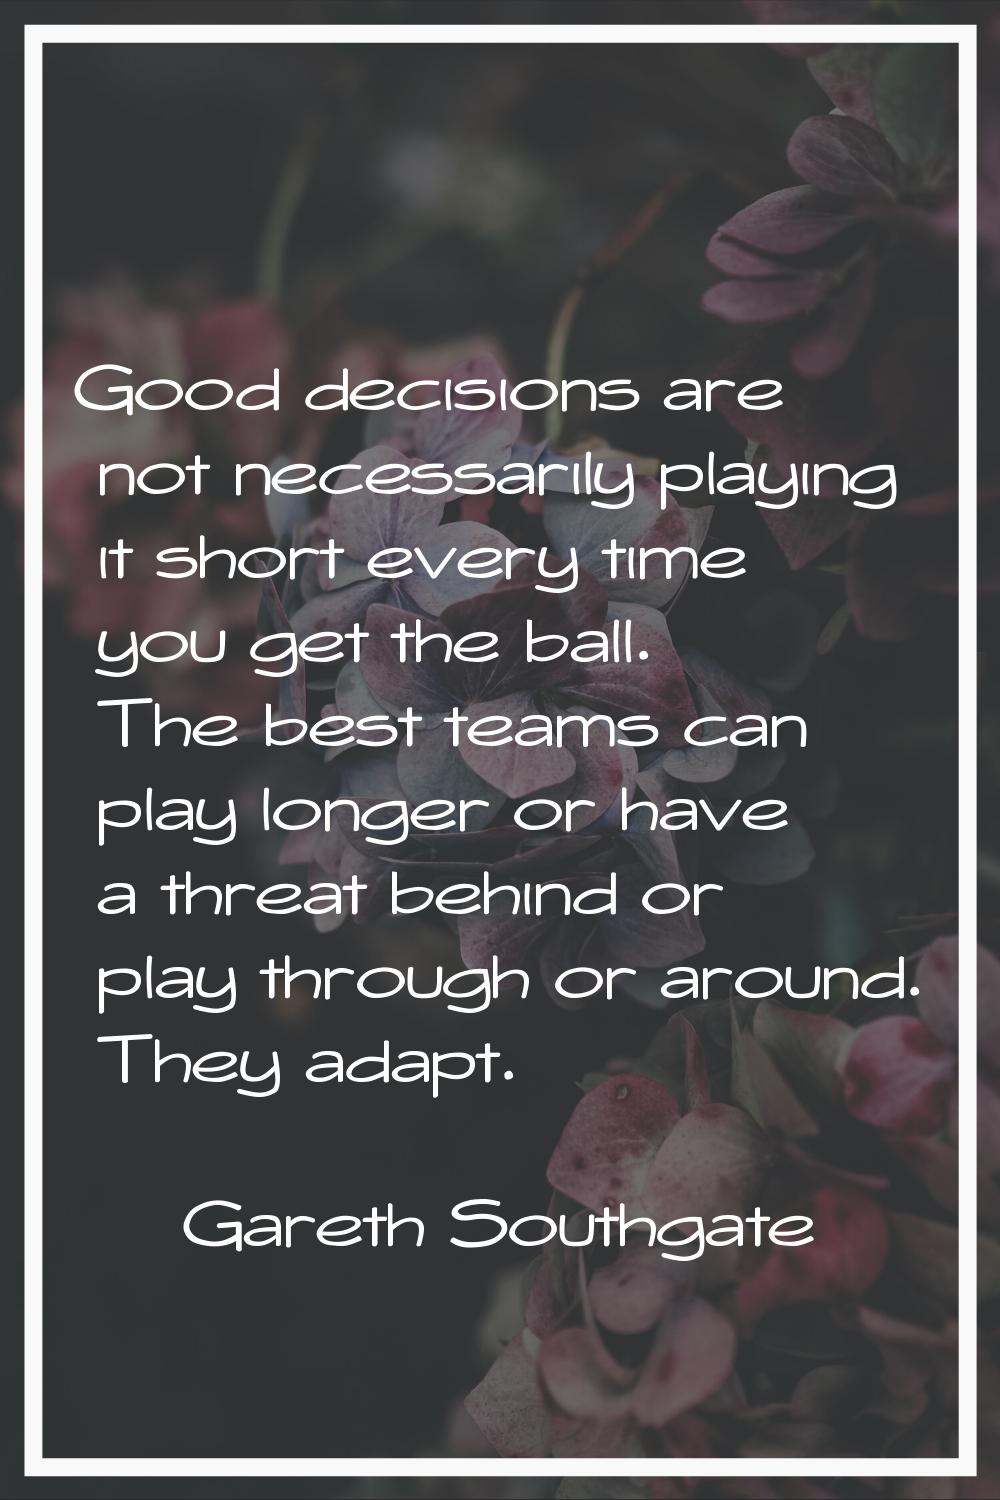 Good decisions are not necessarily playing it short every time you get the ball. The best teams can